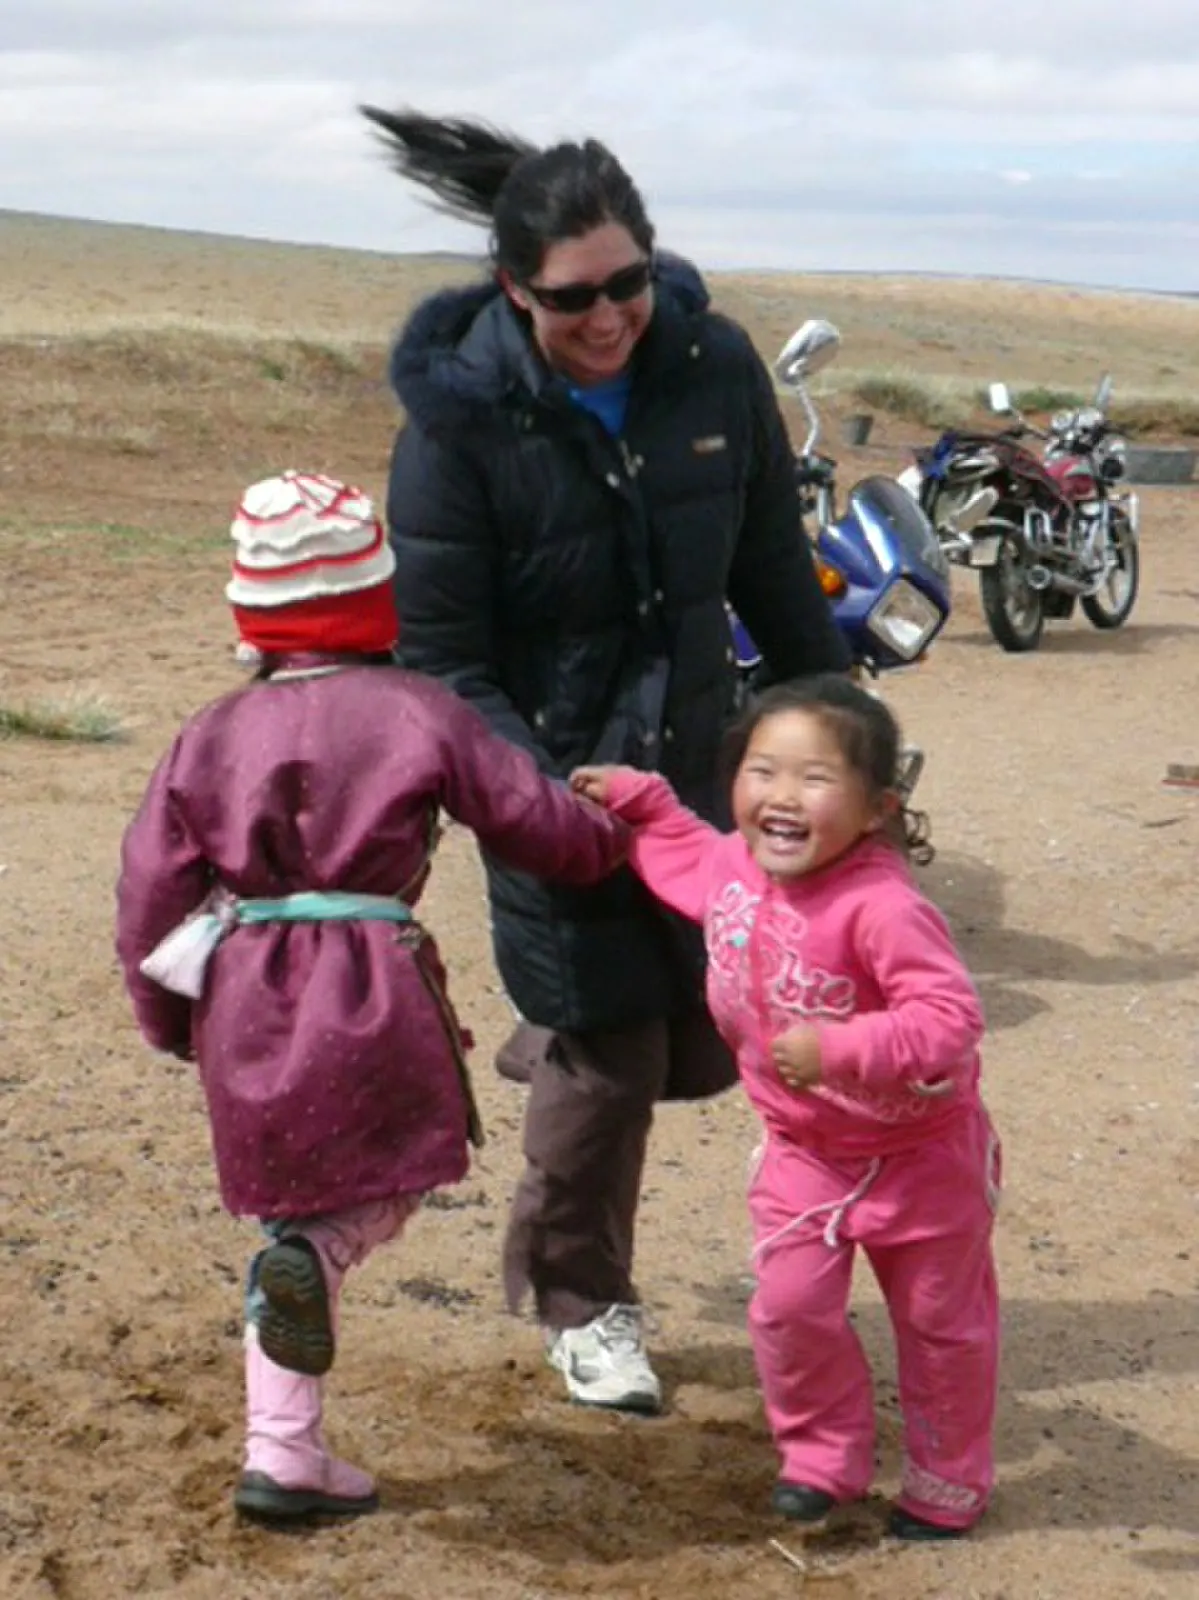 Lisa playing with happy kids in Mongolia.